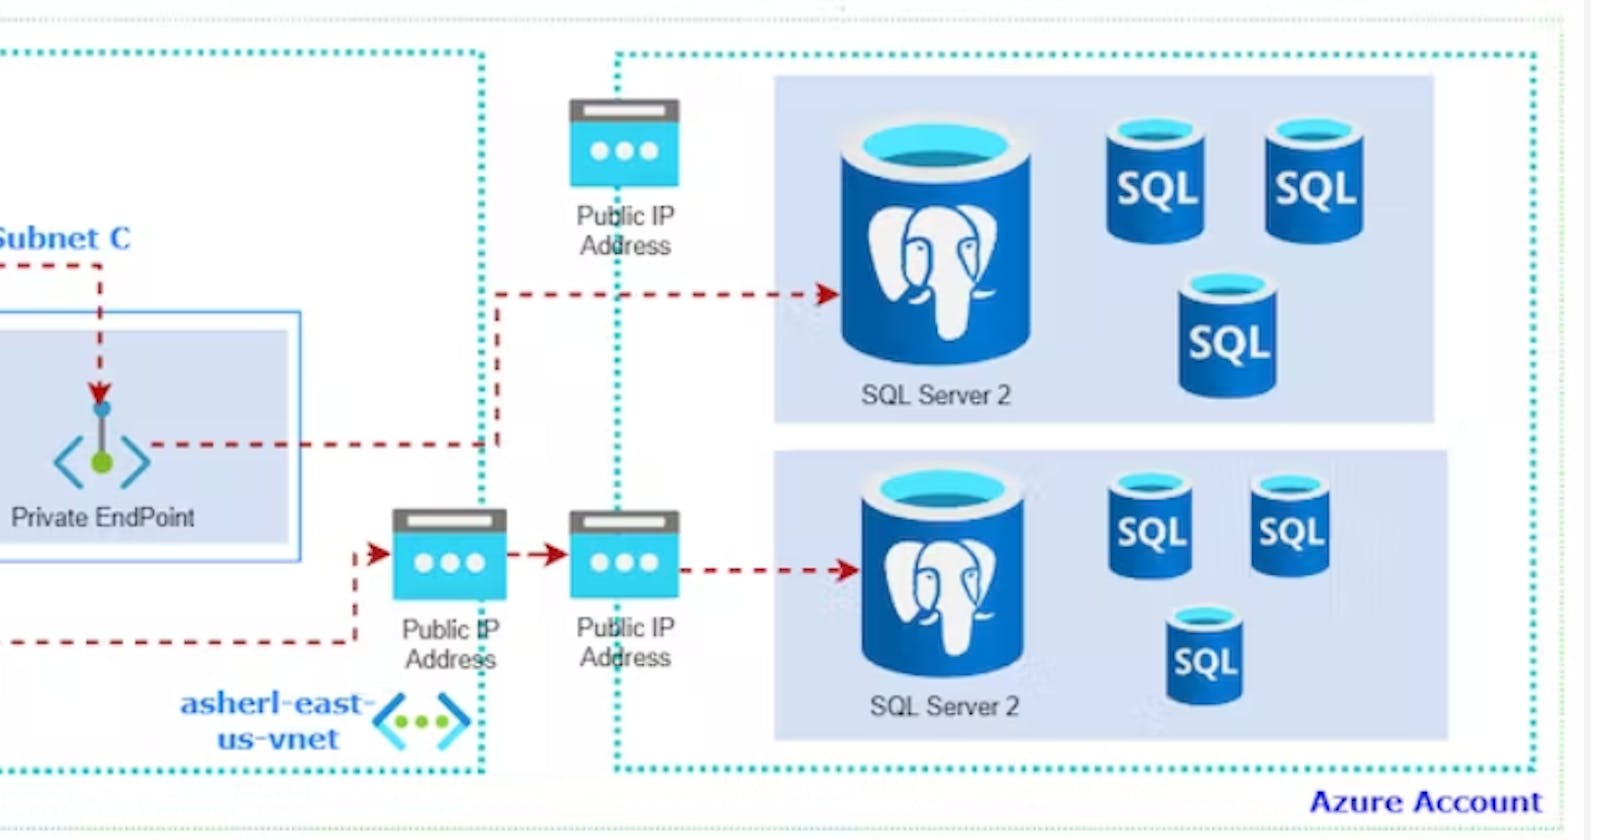 How to create private endpoints in Azure?